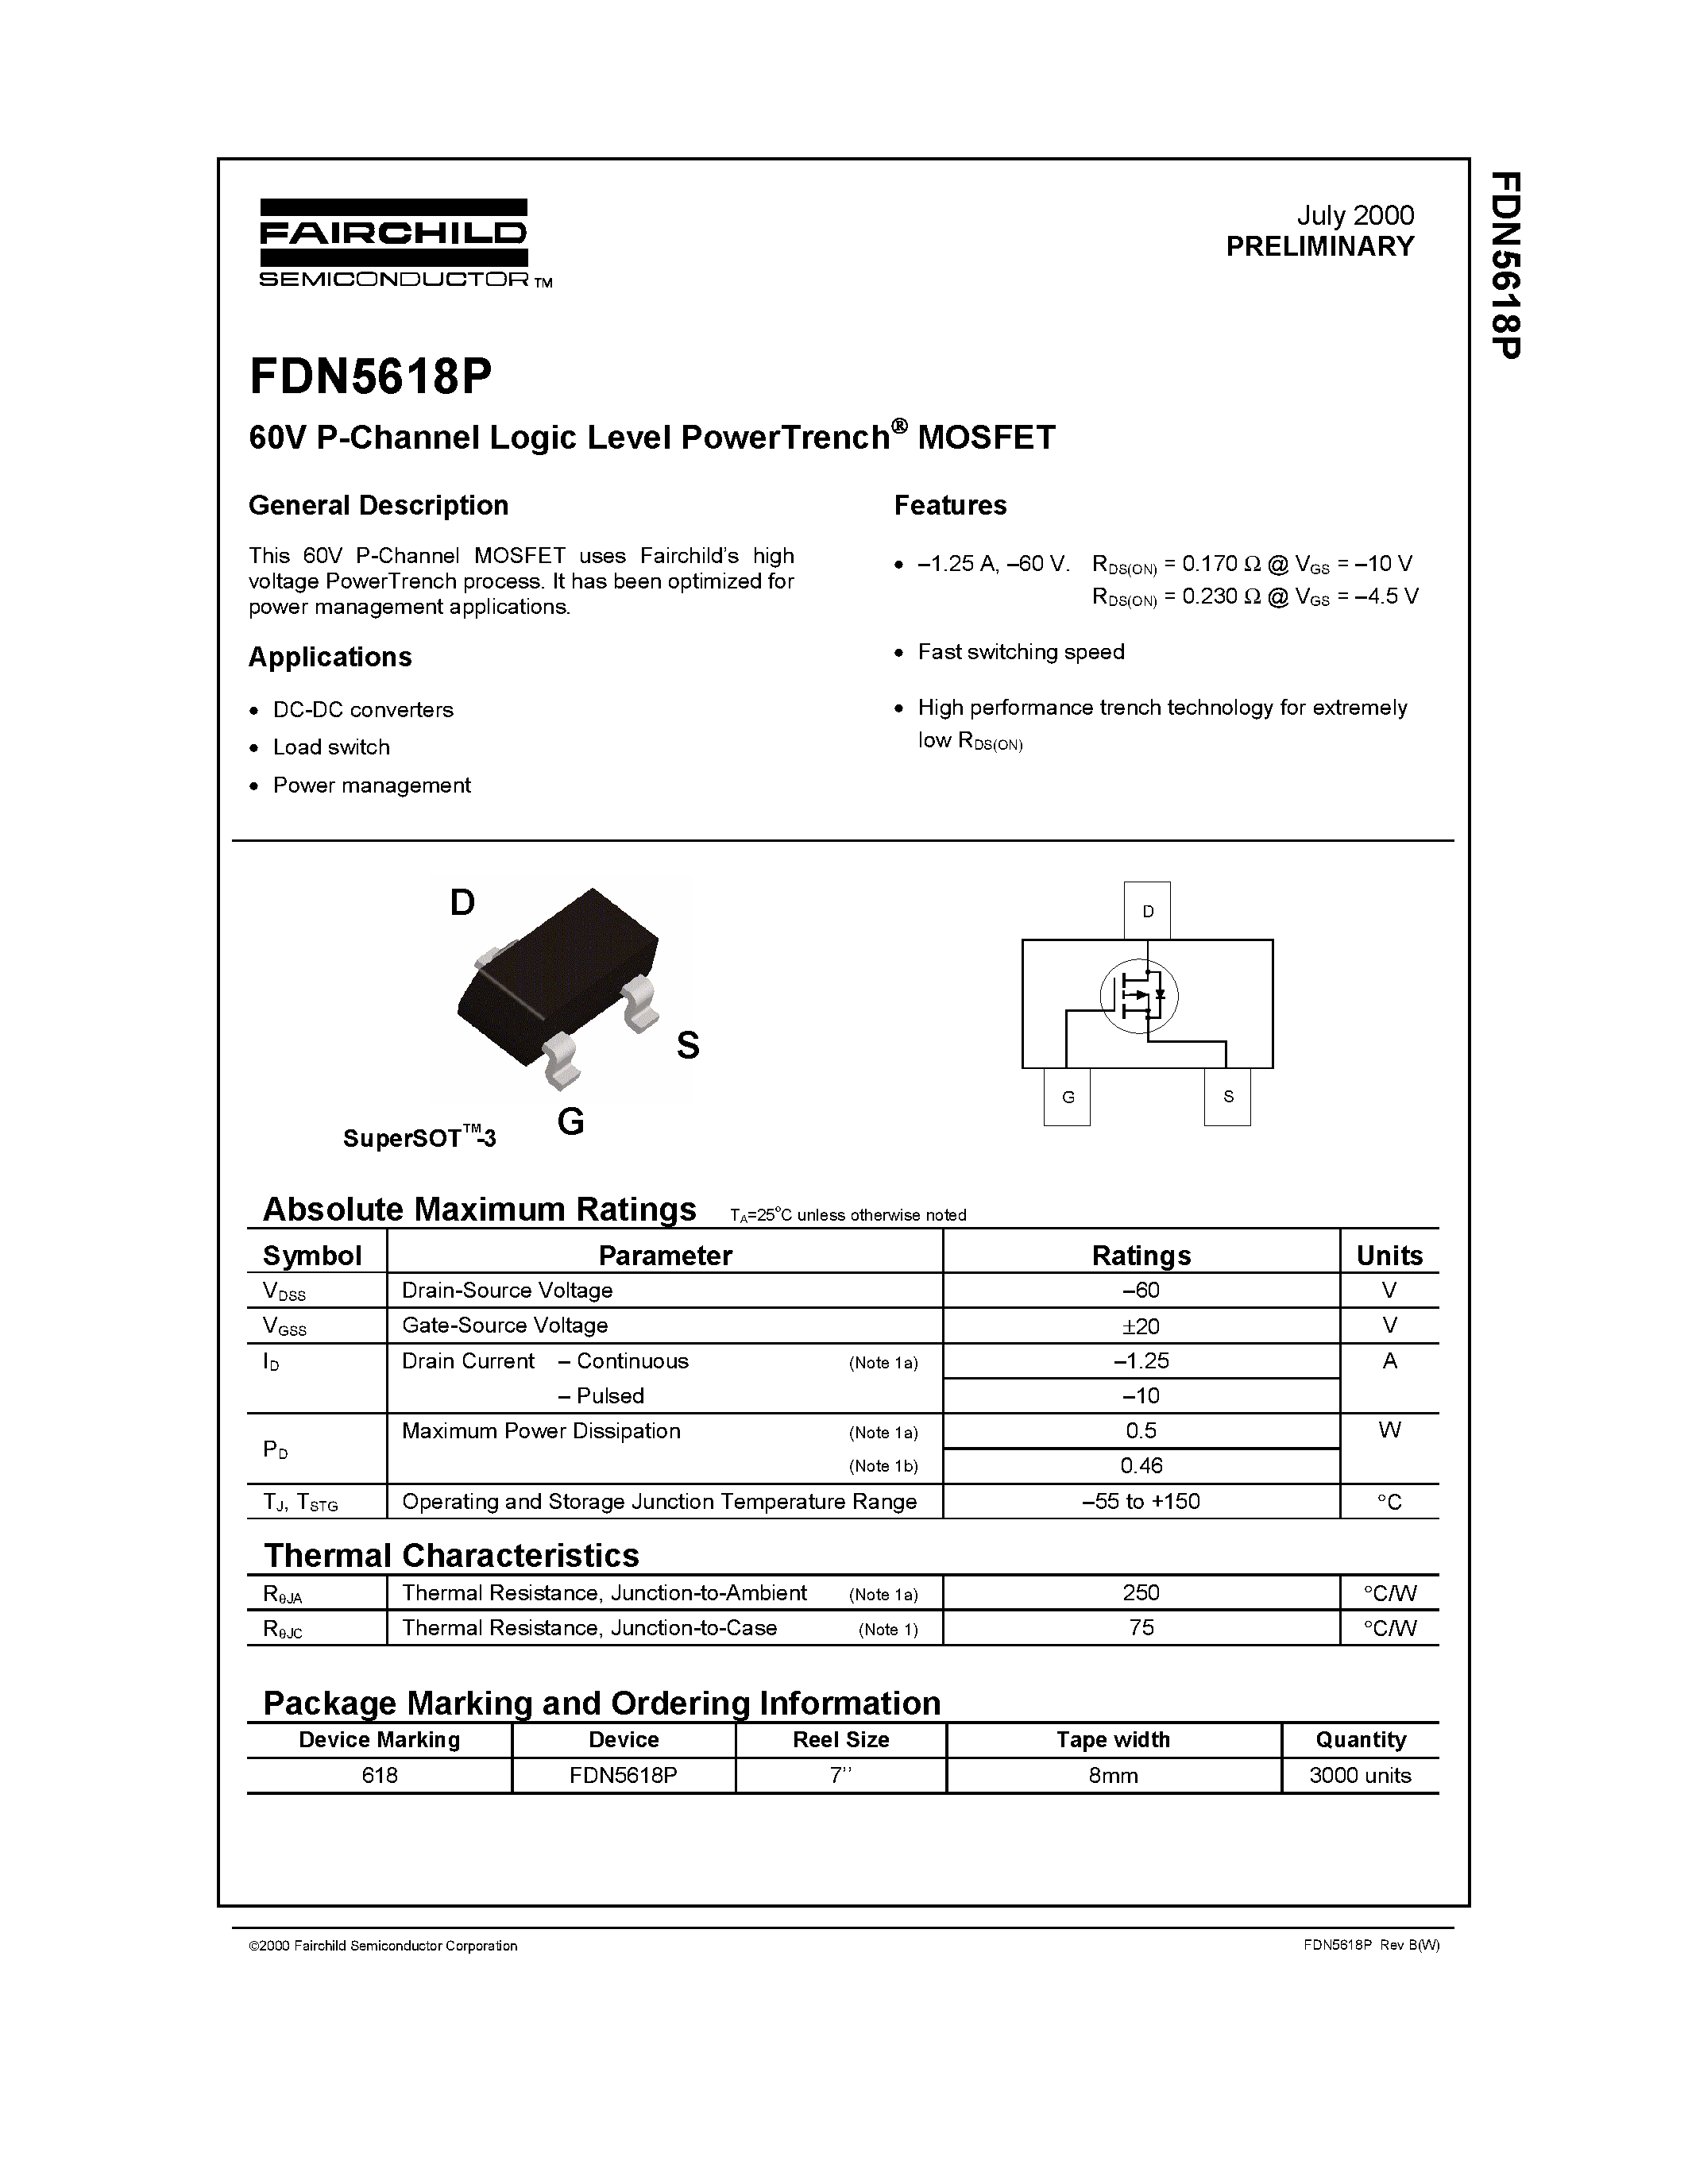 Datasheet FDN5618 - 60V P-Channel Logic Level PowerTrench MOSFET page 1